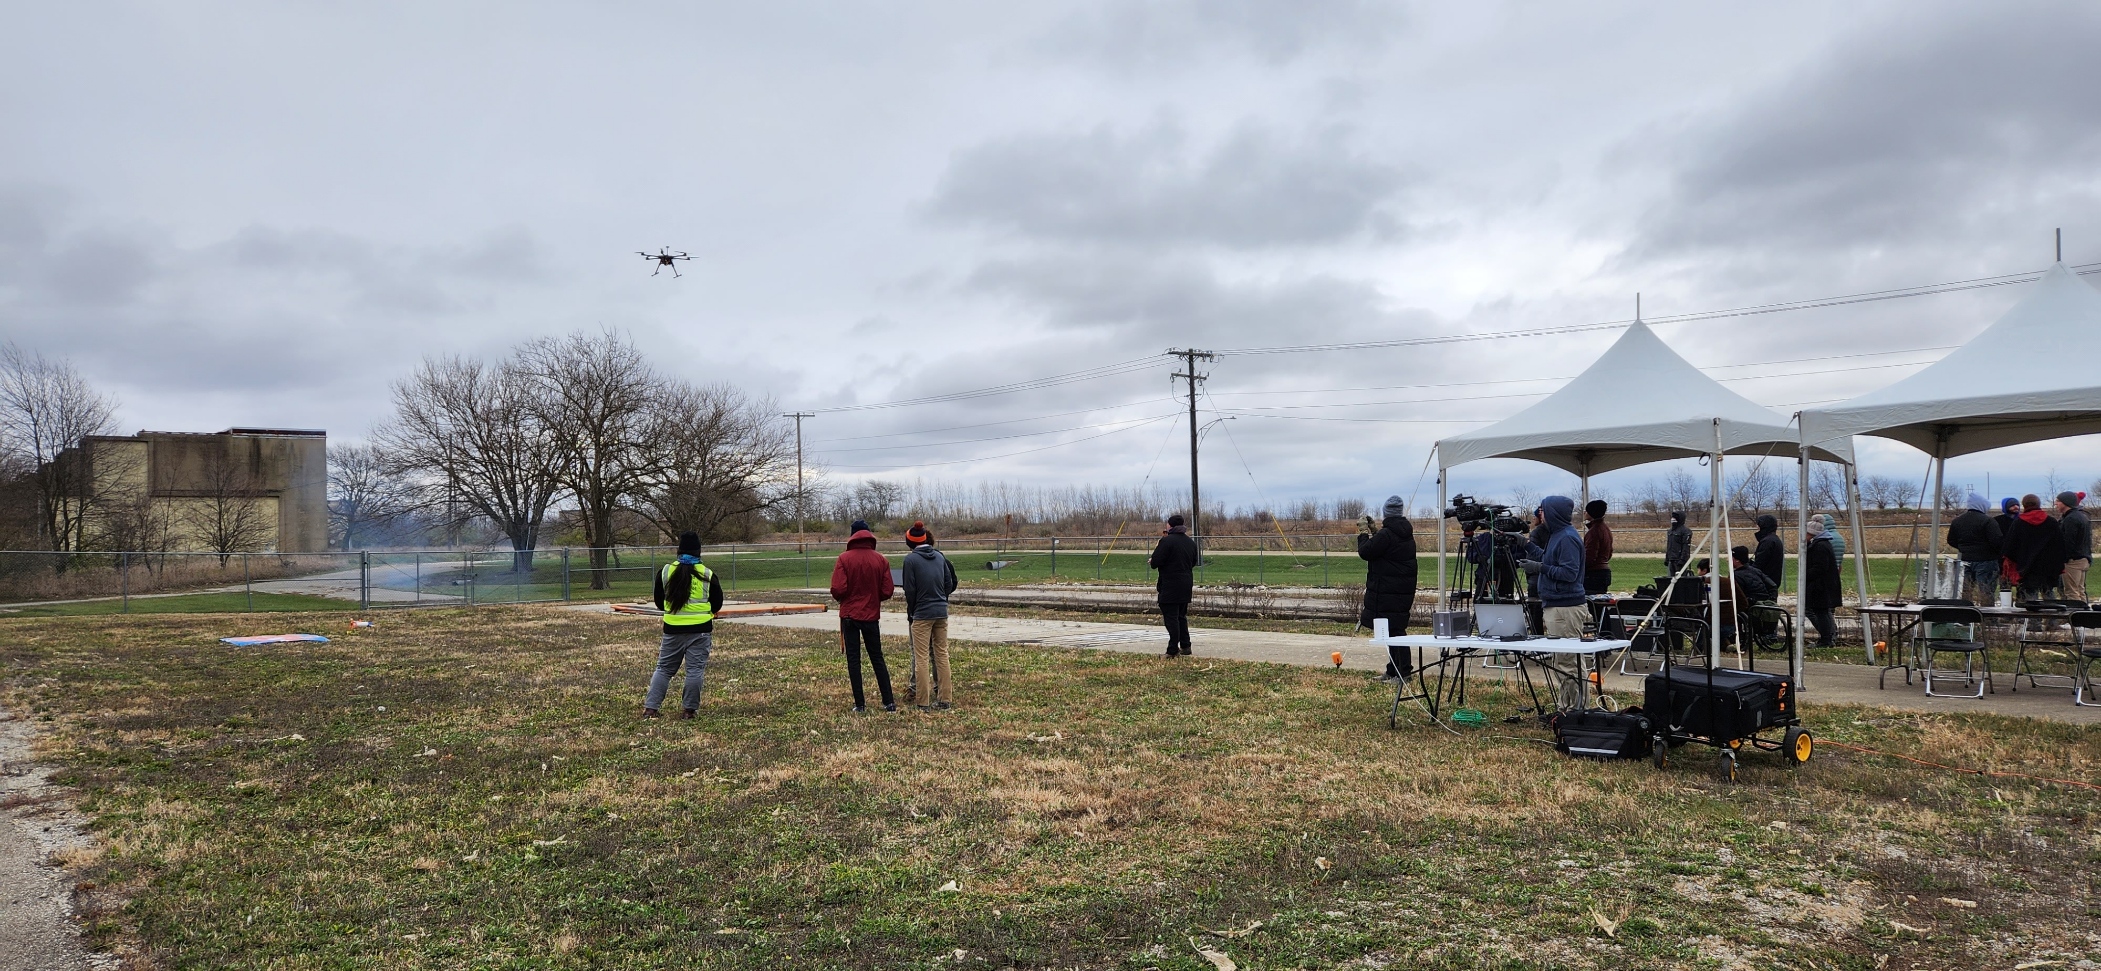 Groups of students gather to test model rockets dropped from drones at the Illinois Center for Transportation in&amp;amp;amp;amp;amp;nbsp;Rantoul, Illinois, on November 12.